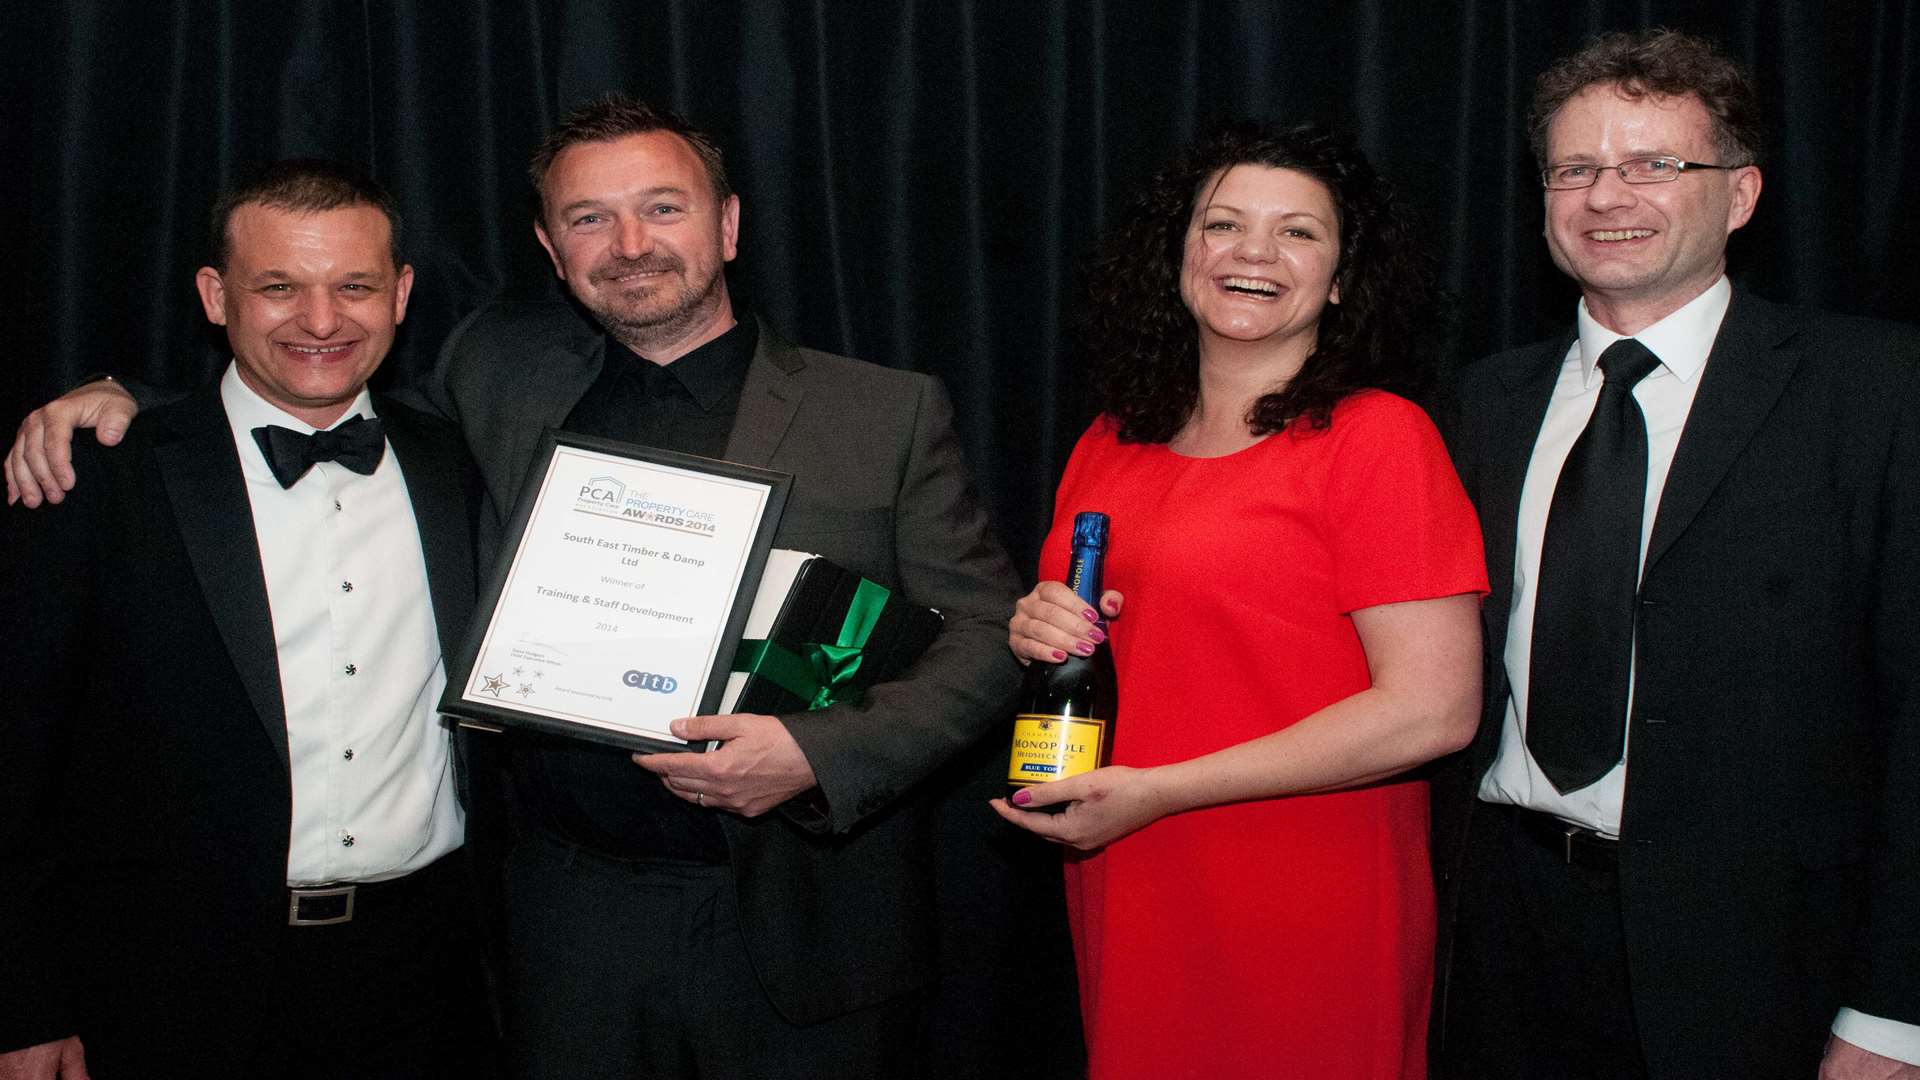 South East Timber and Damp won the won the Training and Staff Development prize